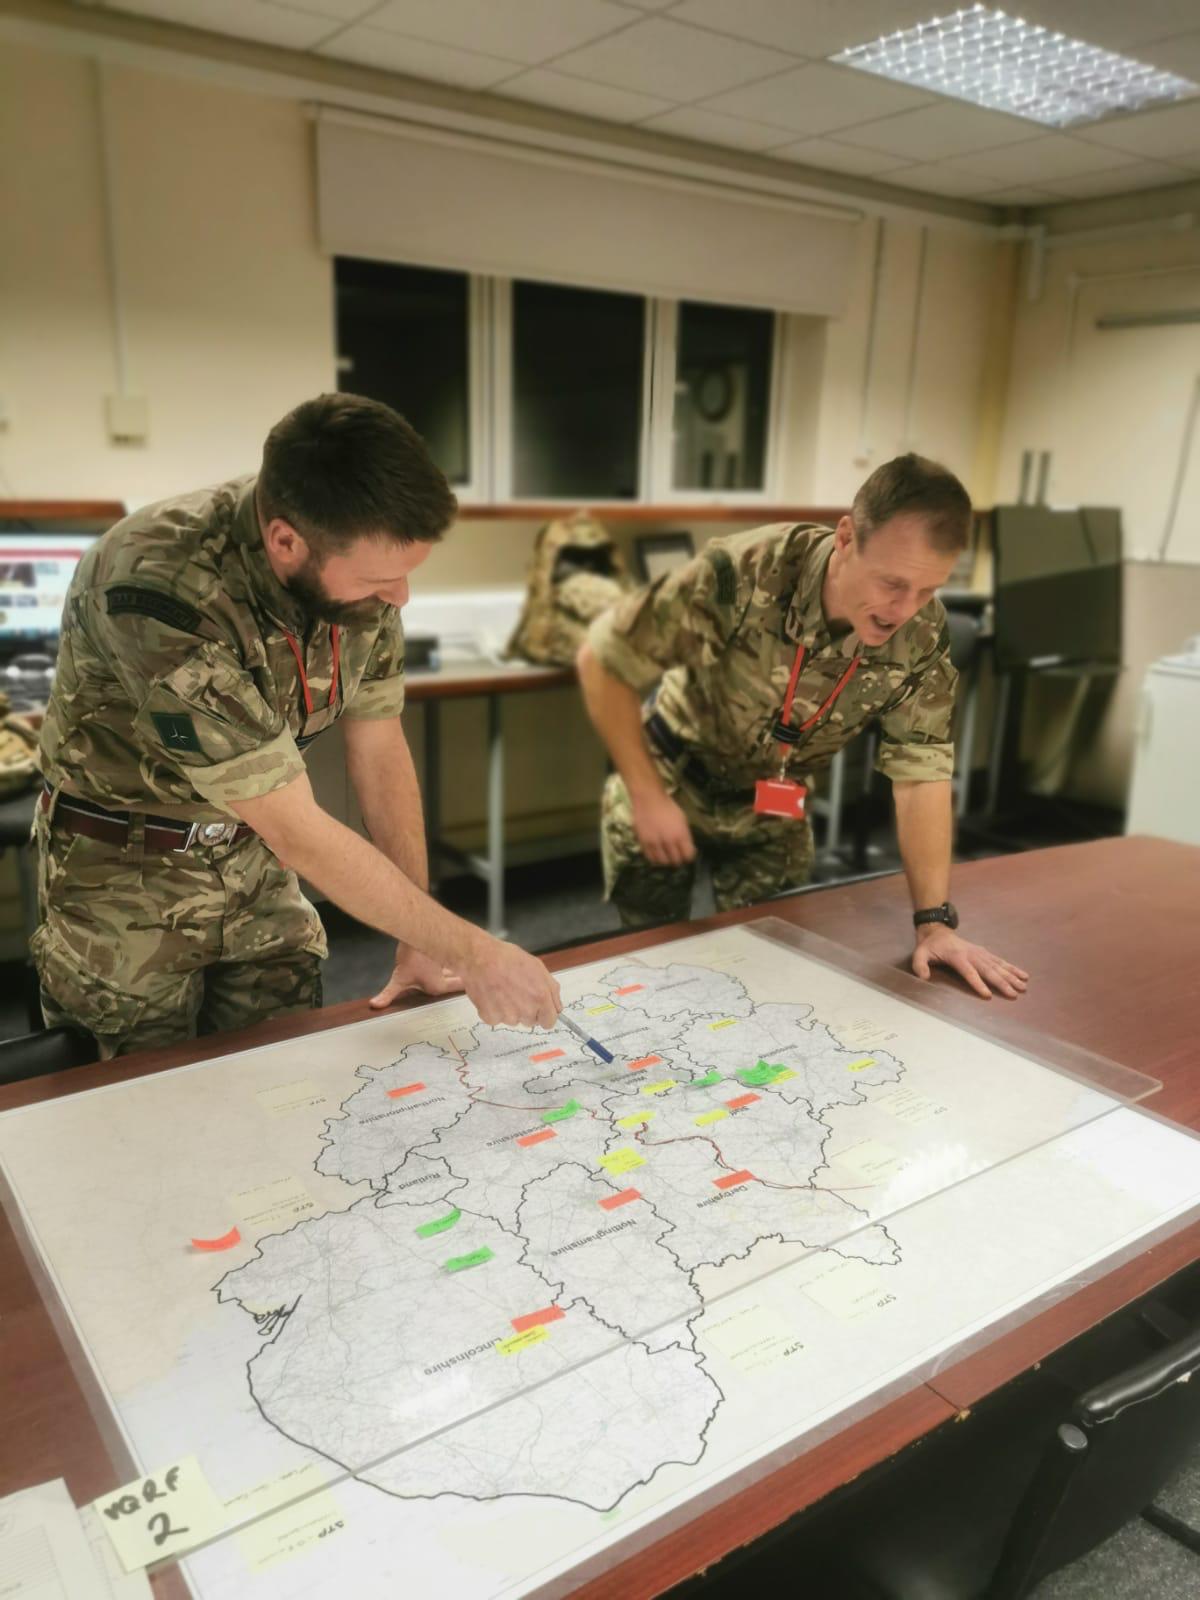 Image shows Flight Lieutenants Clarke and Coatsworth working over a map on a table.